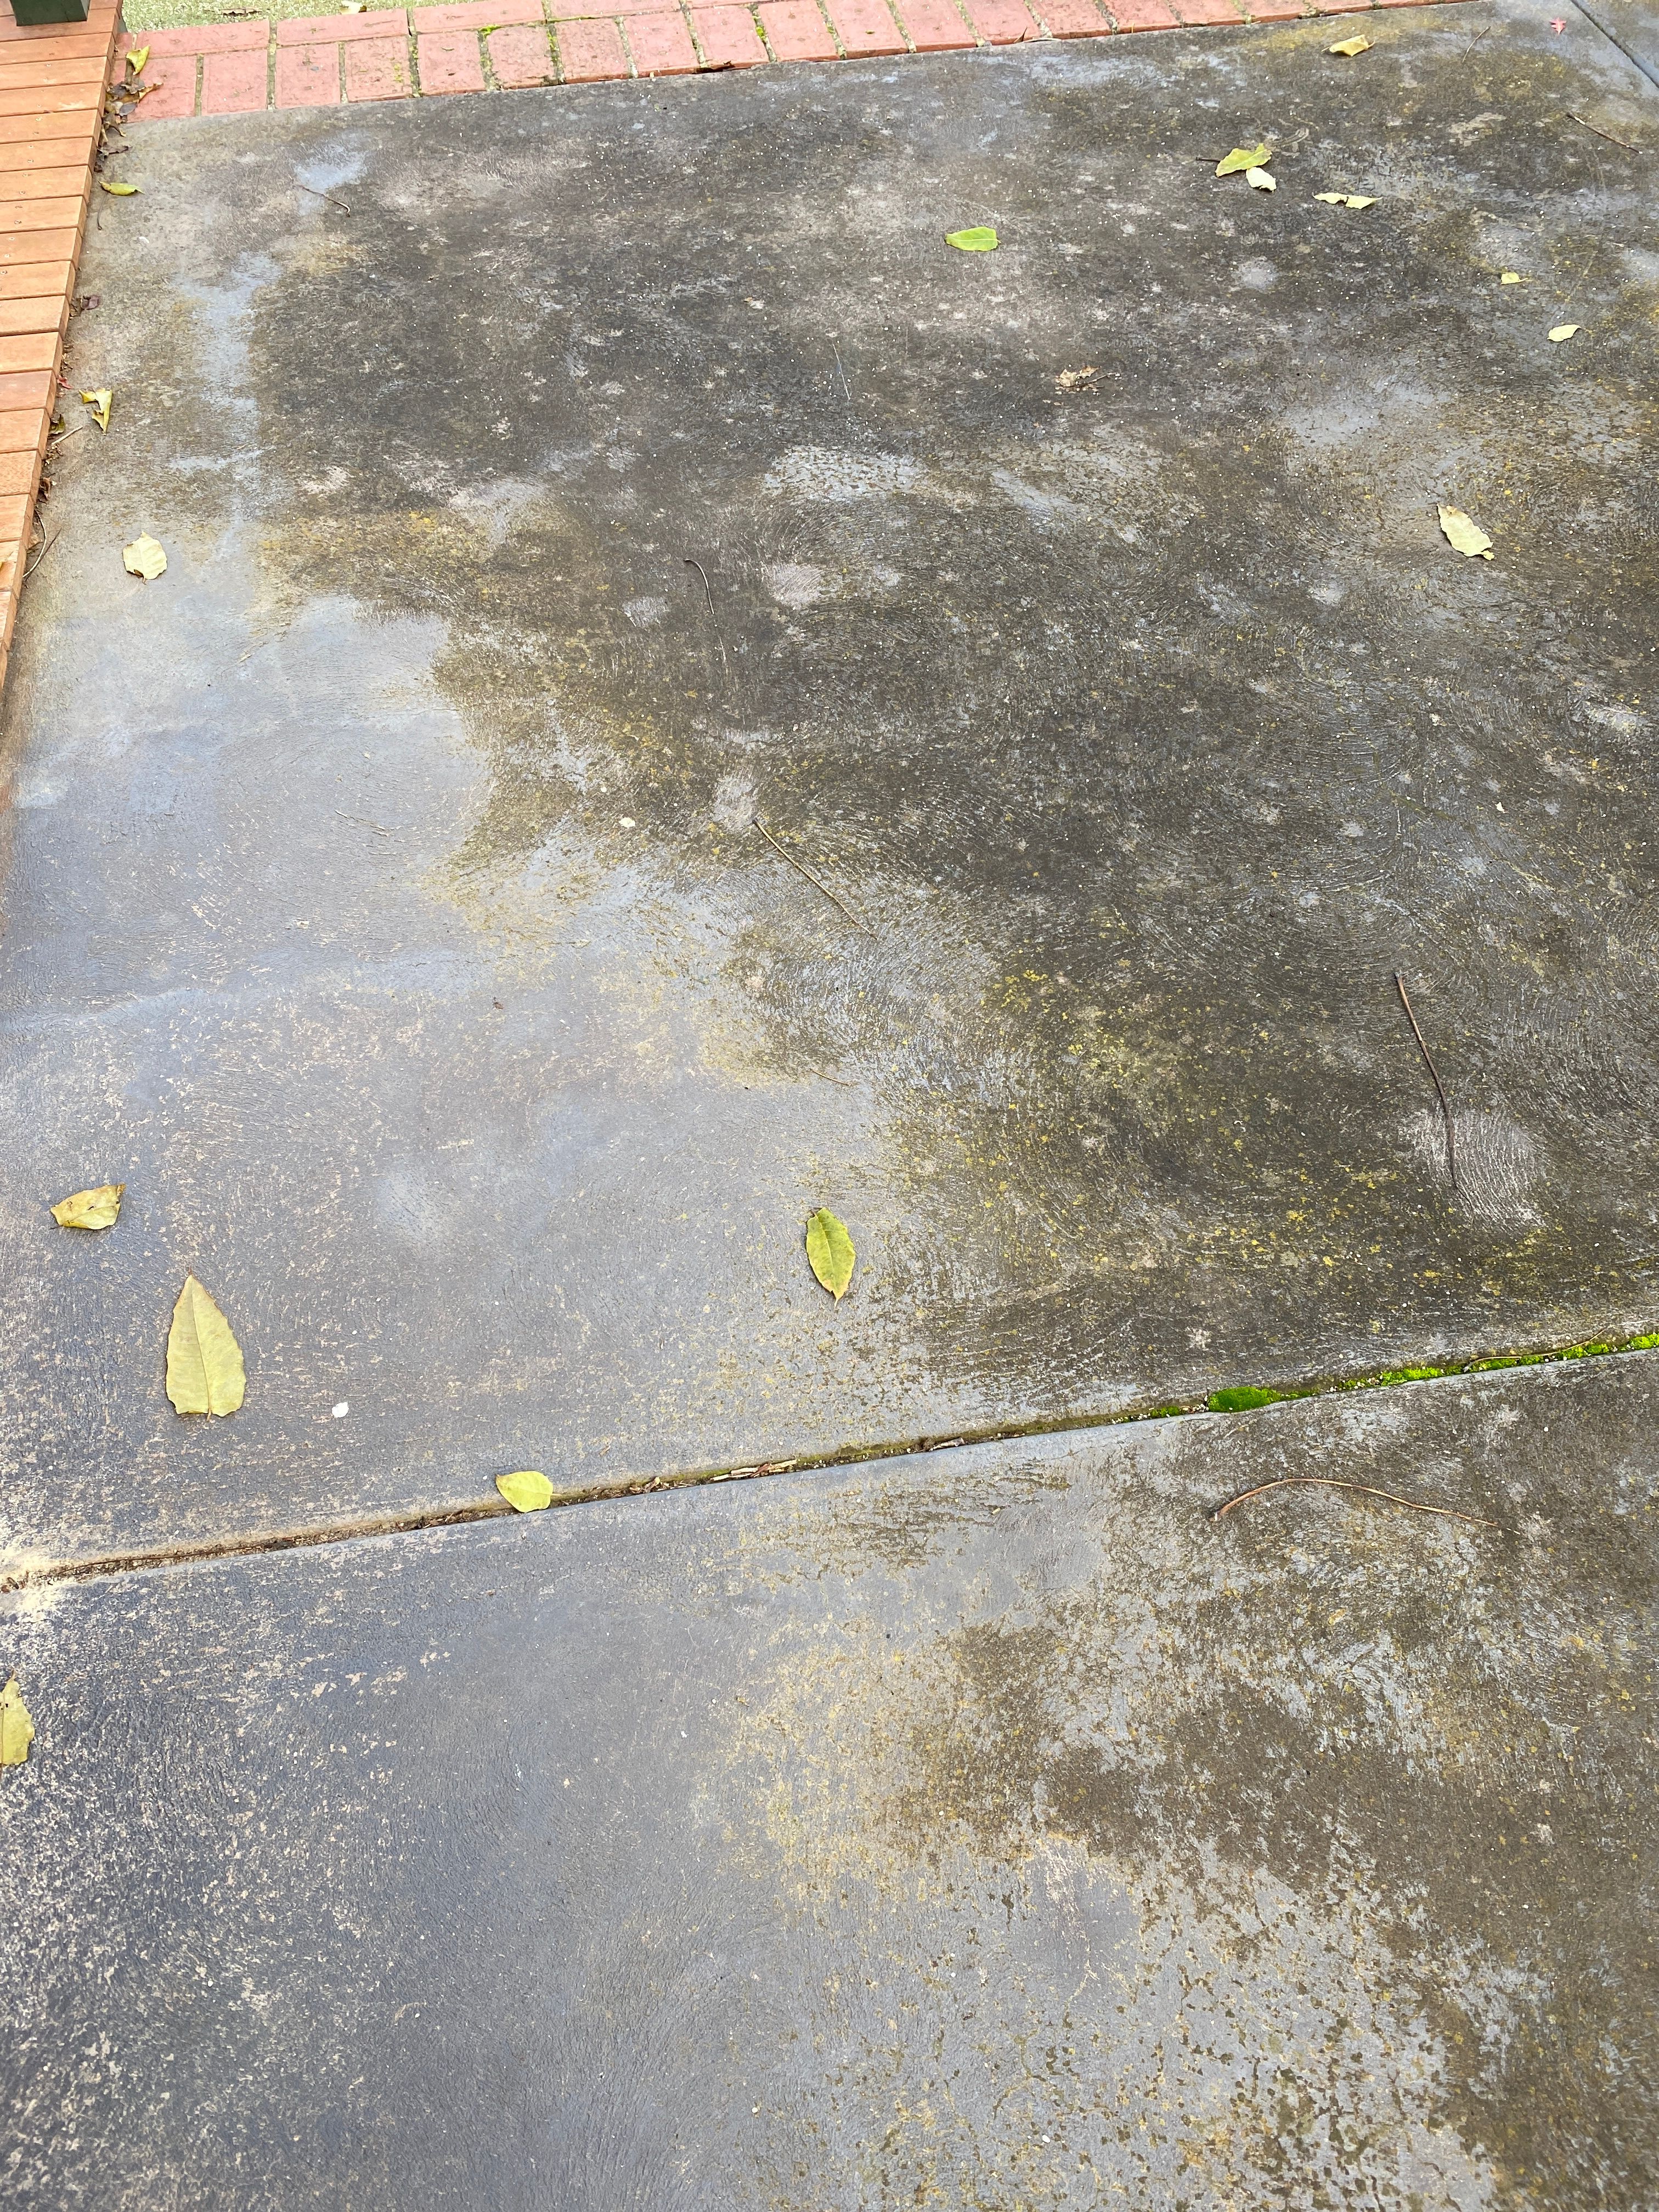 How to clean concrete? | Bunnings Workshop community